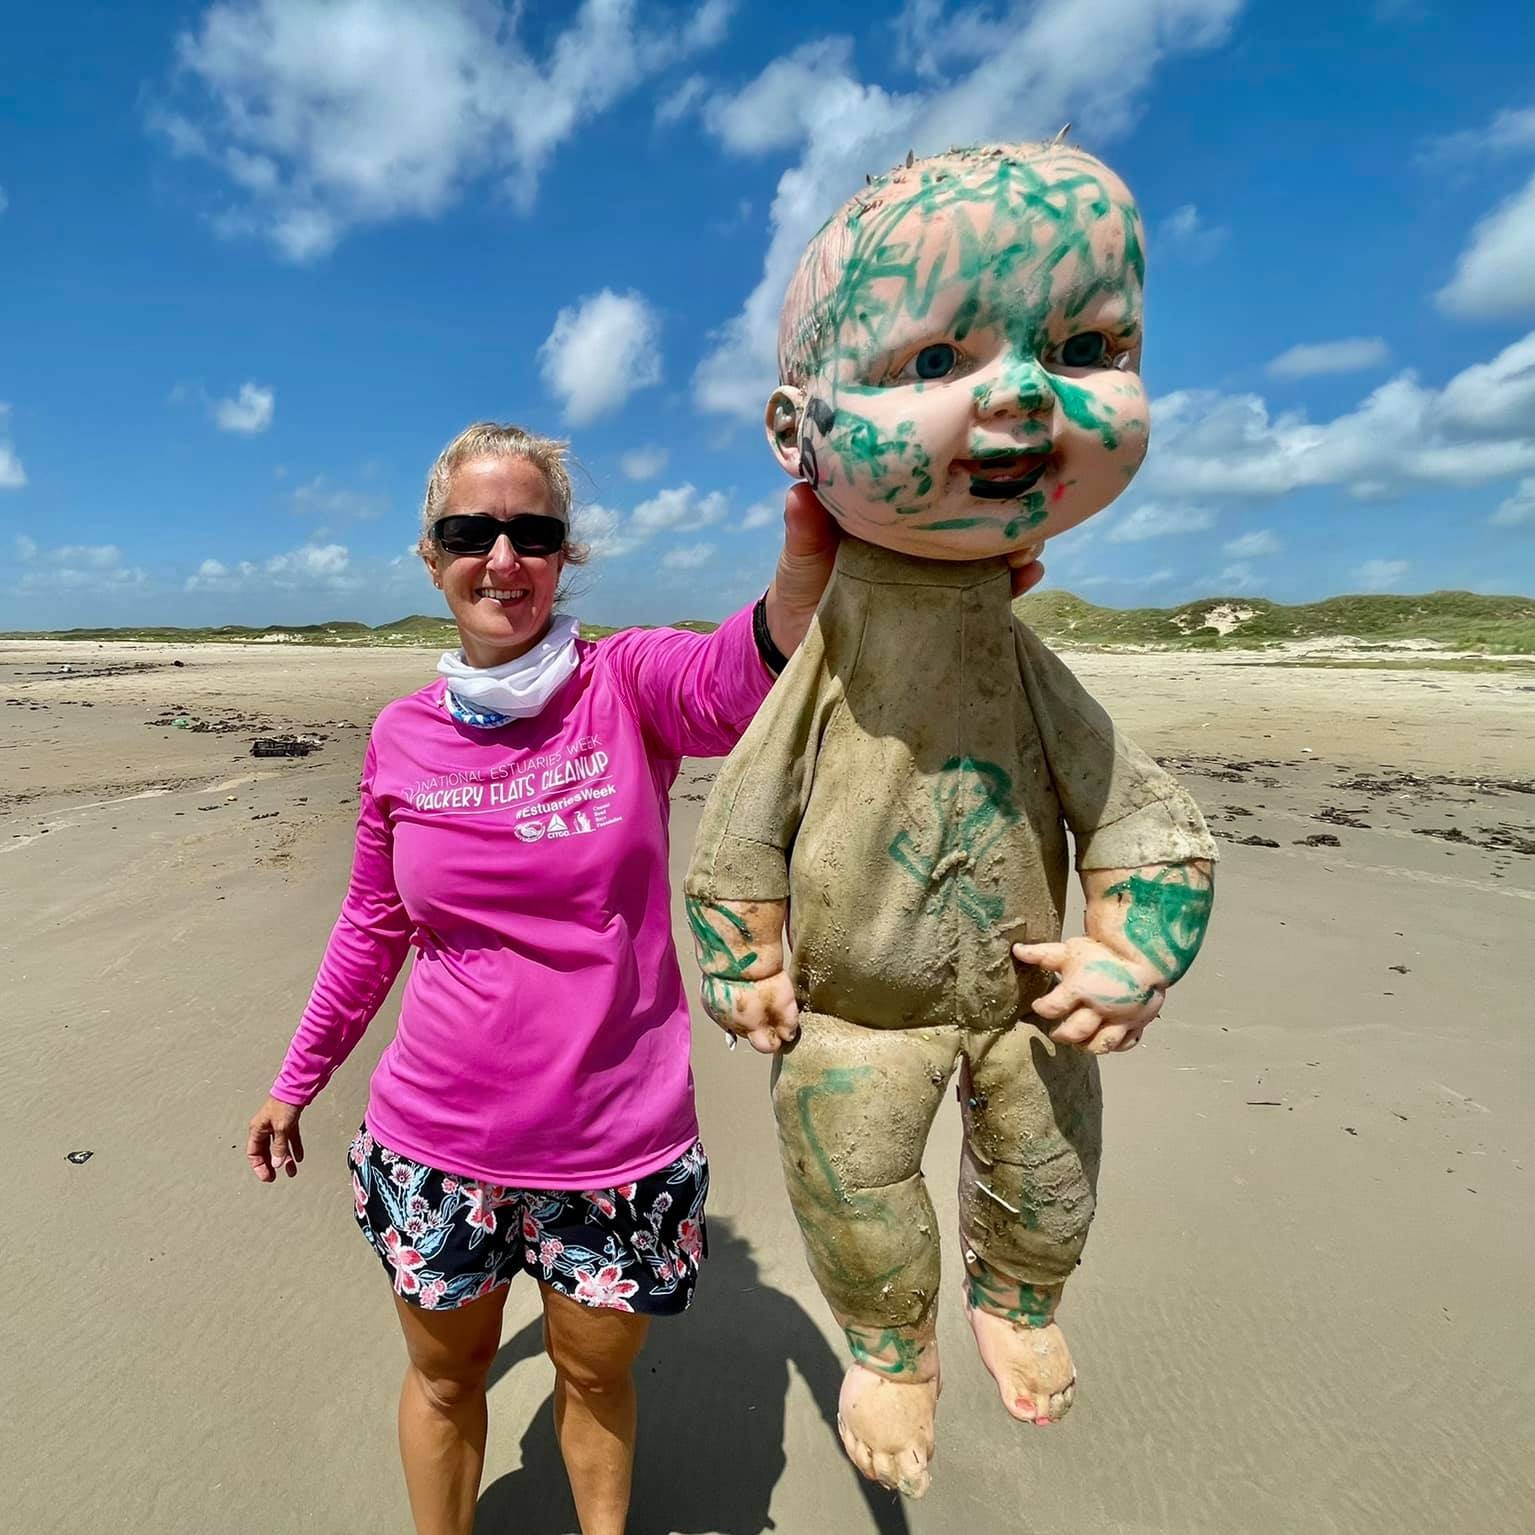 A researcher with Mission-Aransas Reserve at the University of Texas Marine Institute holds a doll found while surveying the coasts from north Padre Island to Matagorda Island in Texas.